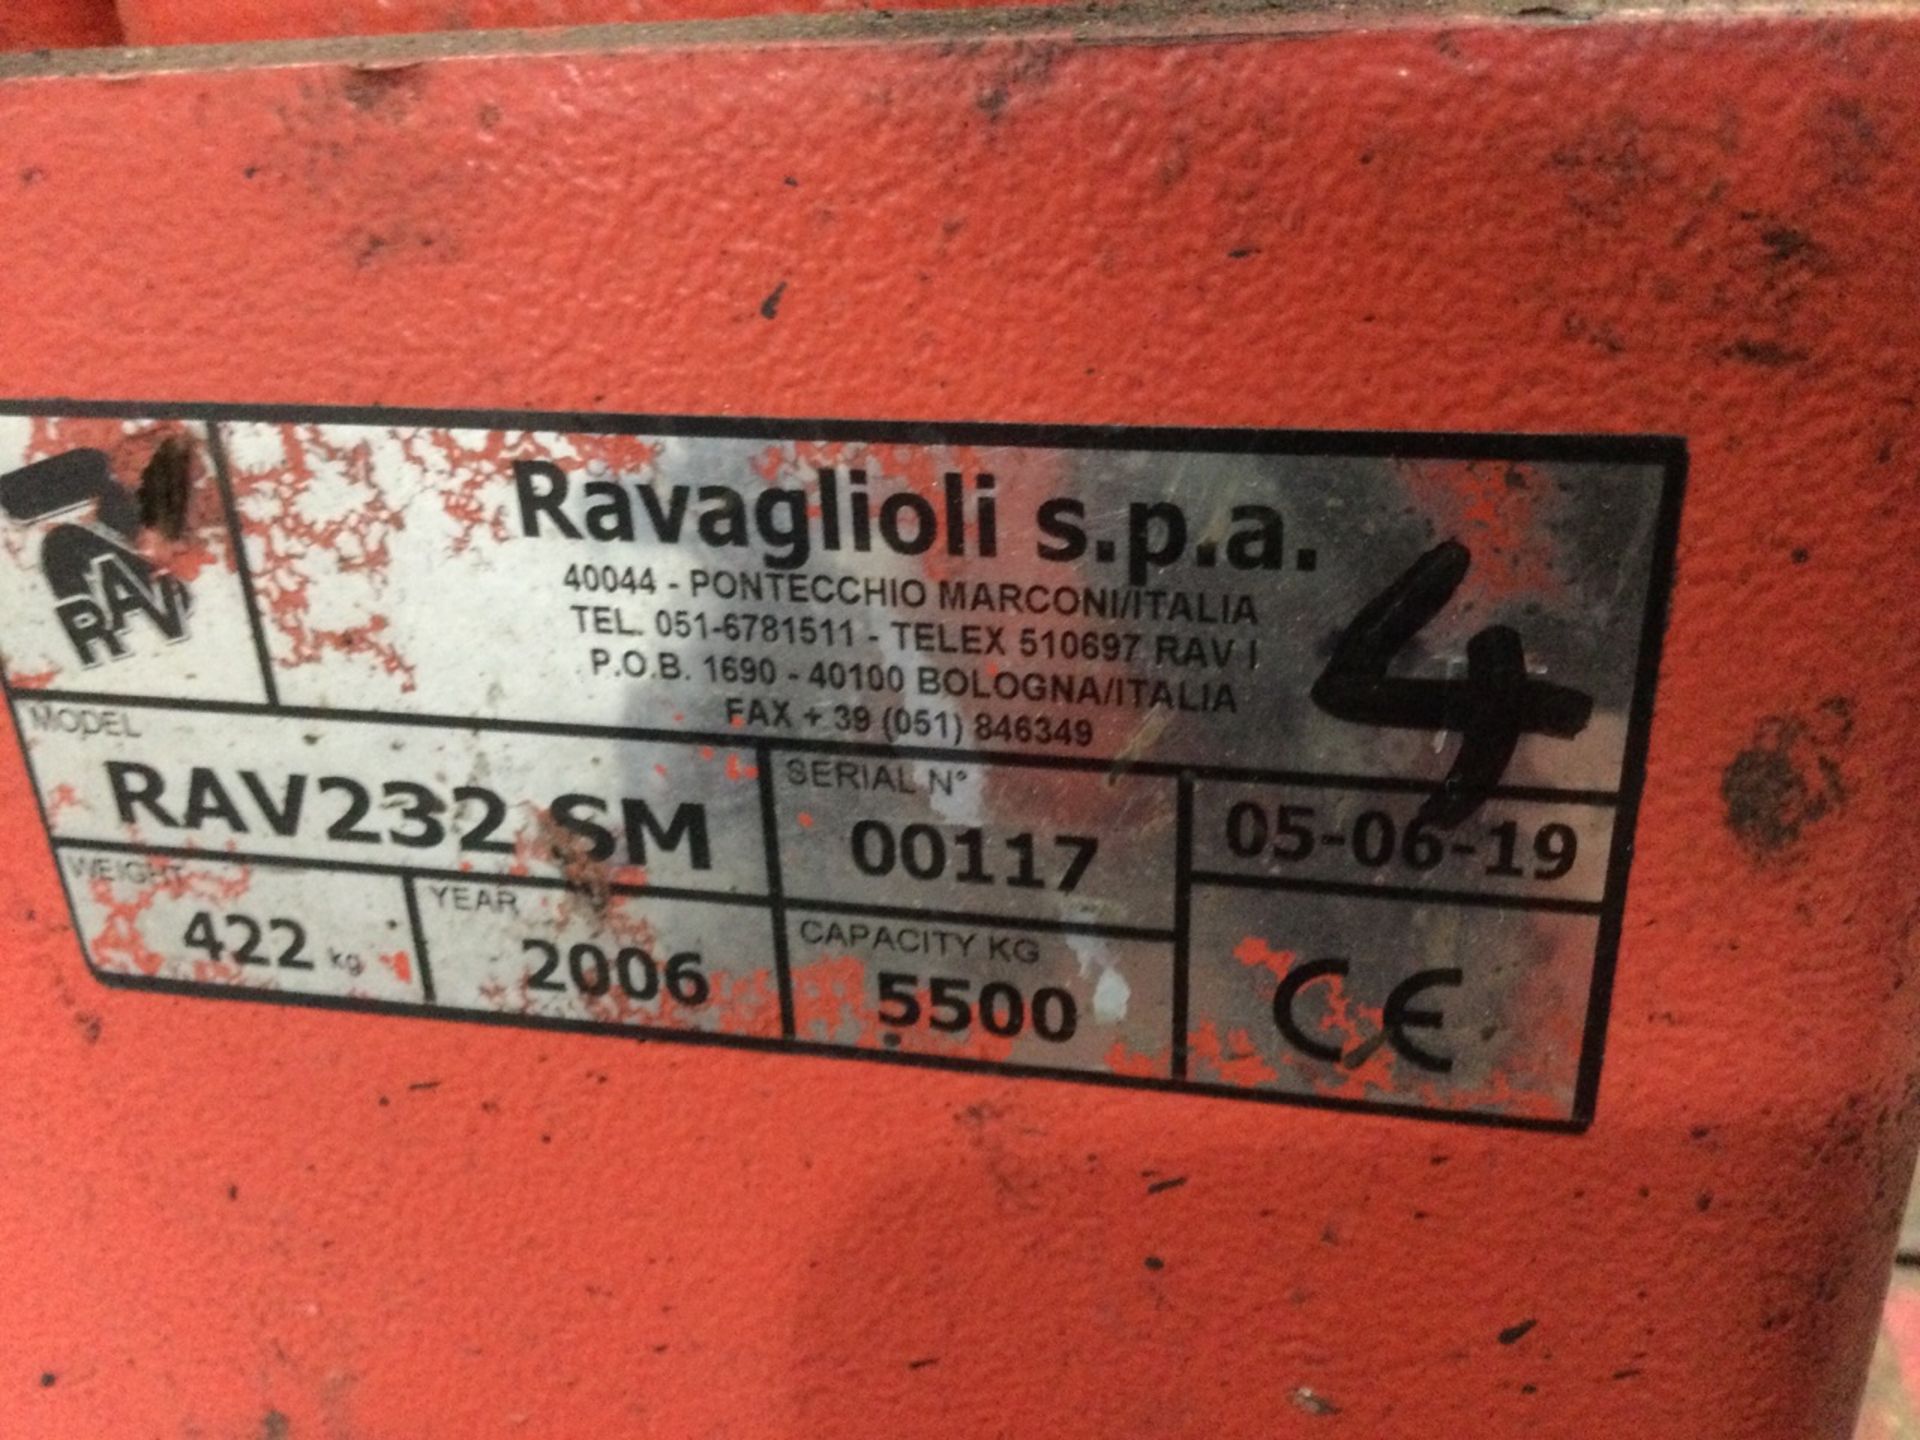 Somers/Ravaglioli RAV232 SM Mobile Cable Connected Vehicle Stands, Each 5500kg Capacity, serial numb - Image 5 of 6